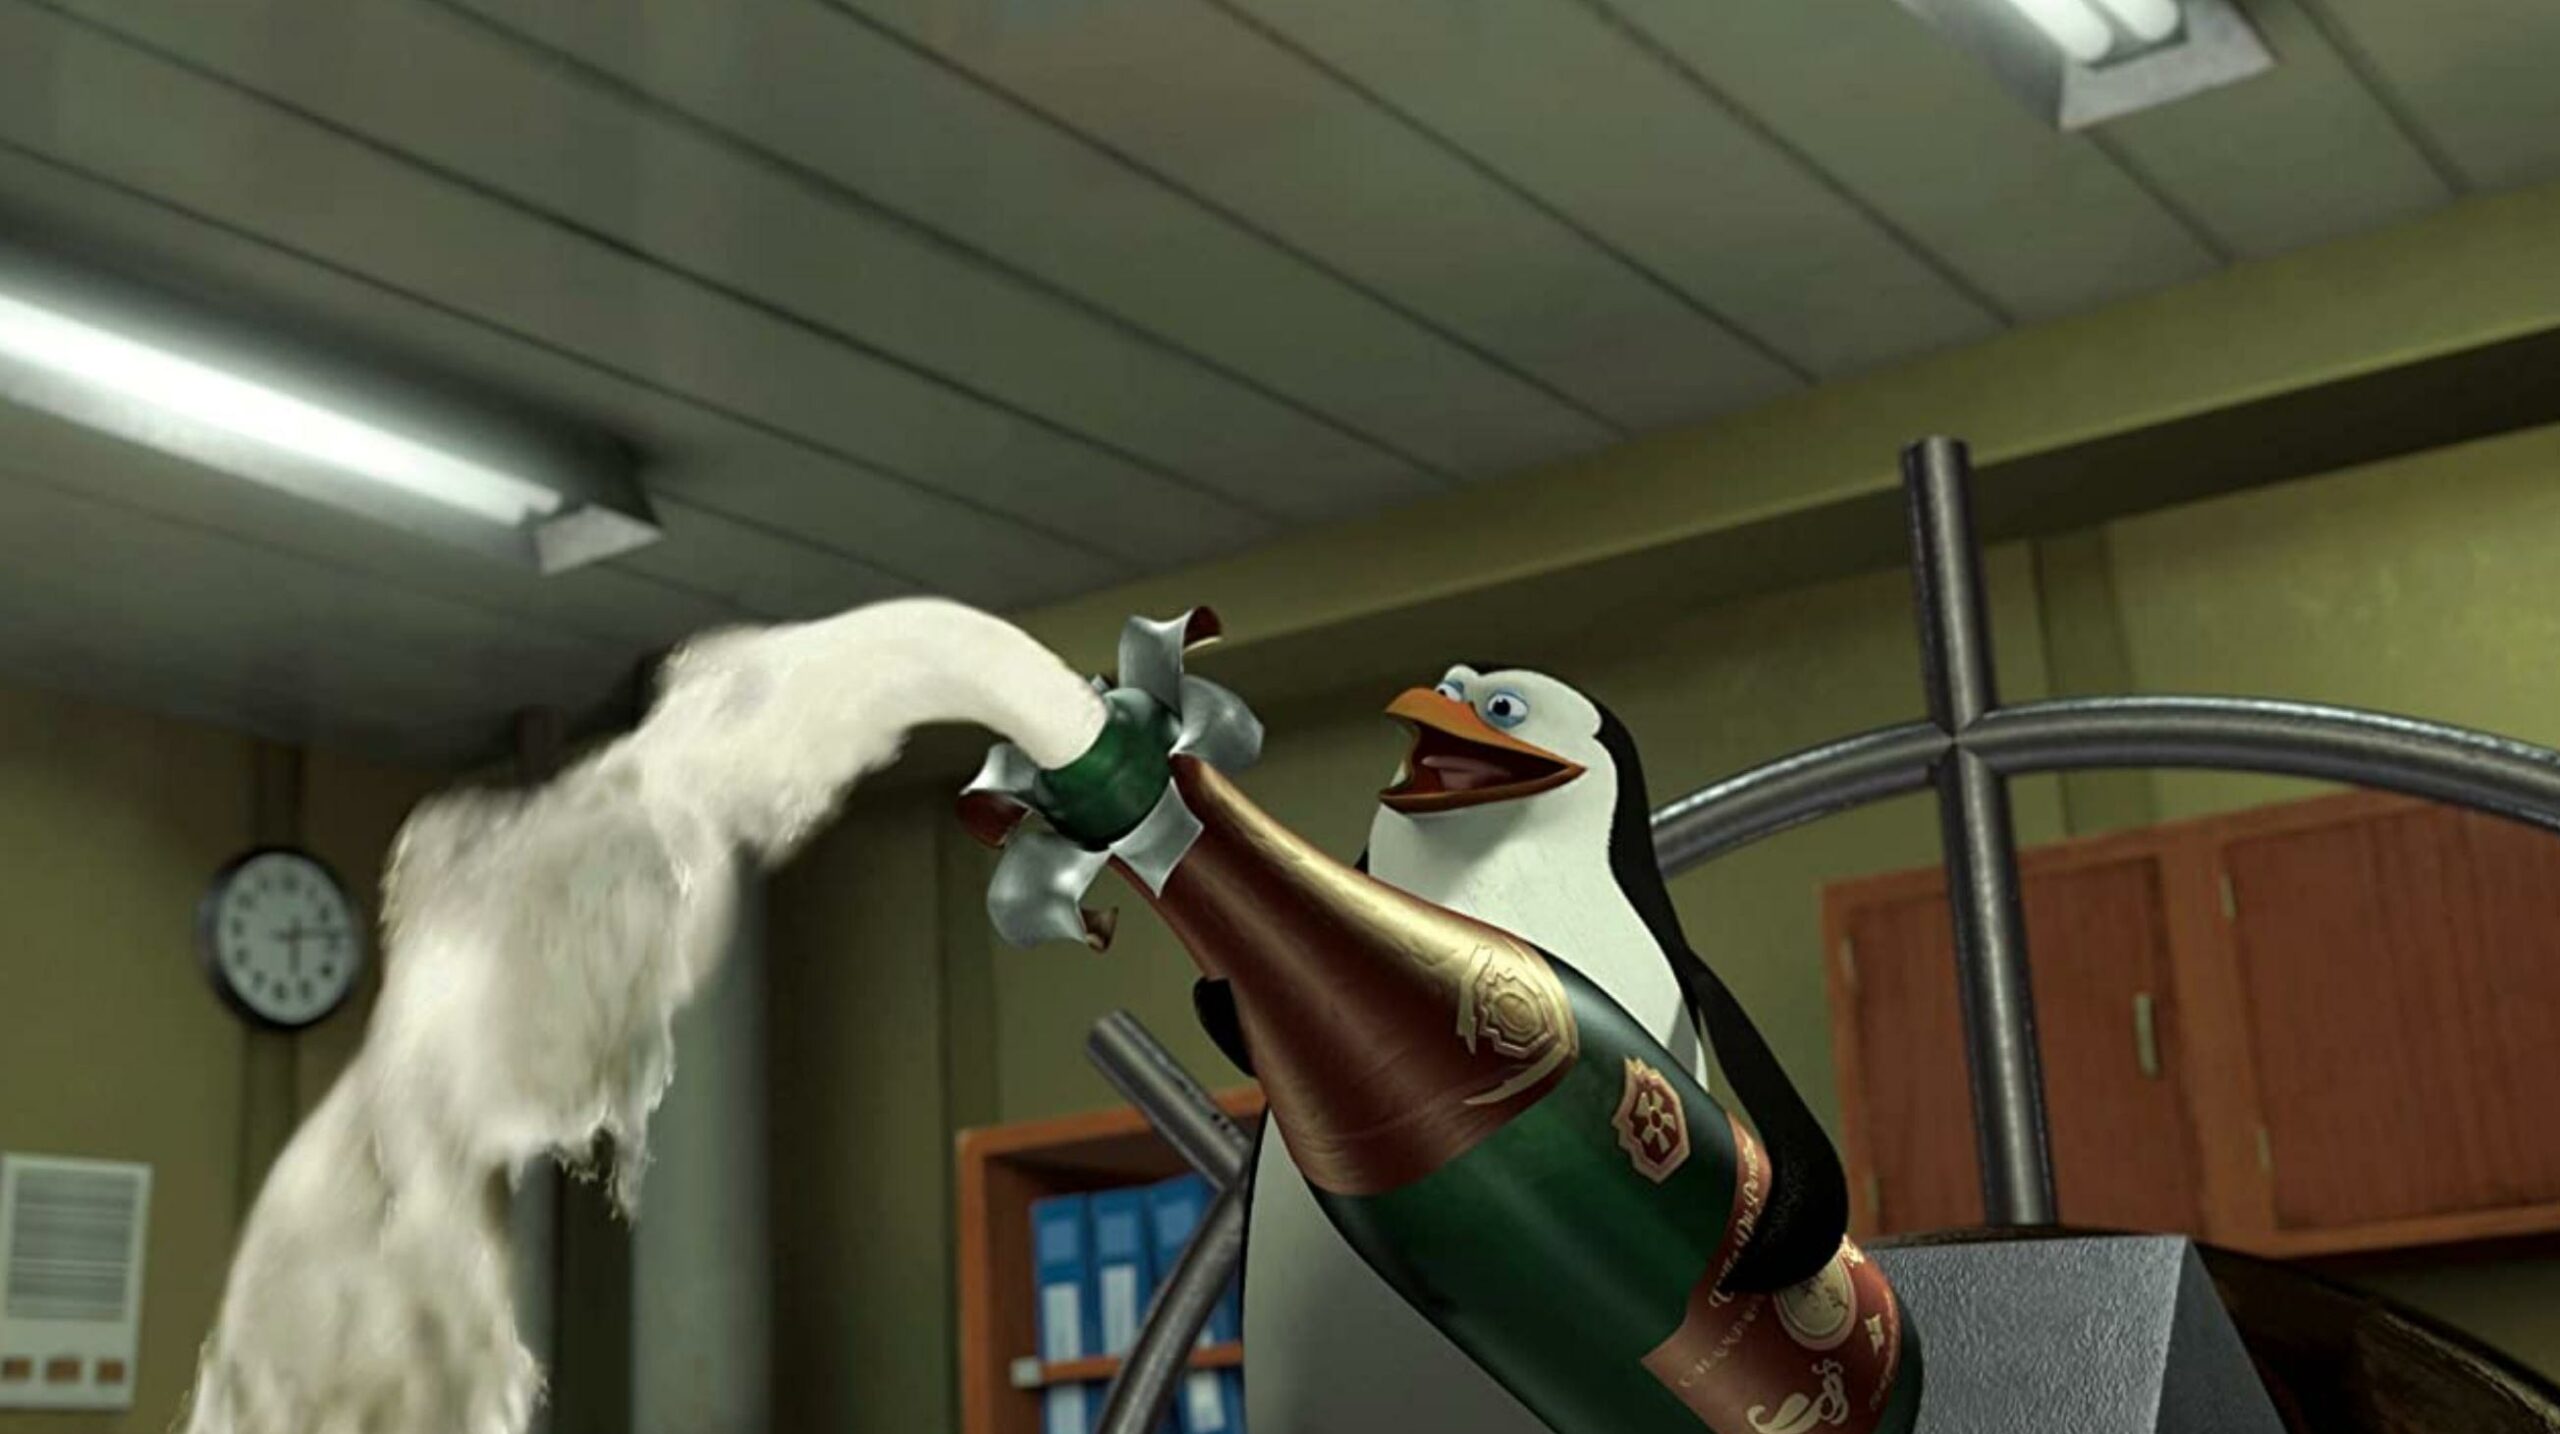 Penguin from movie Madagascar popping a bottle of champagne